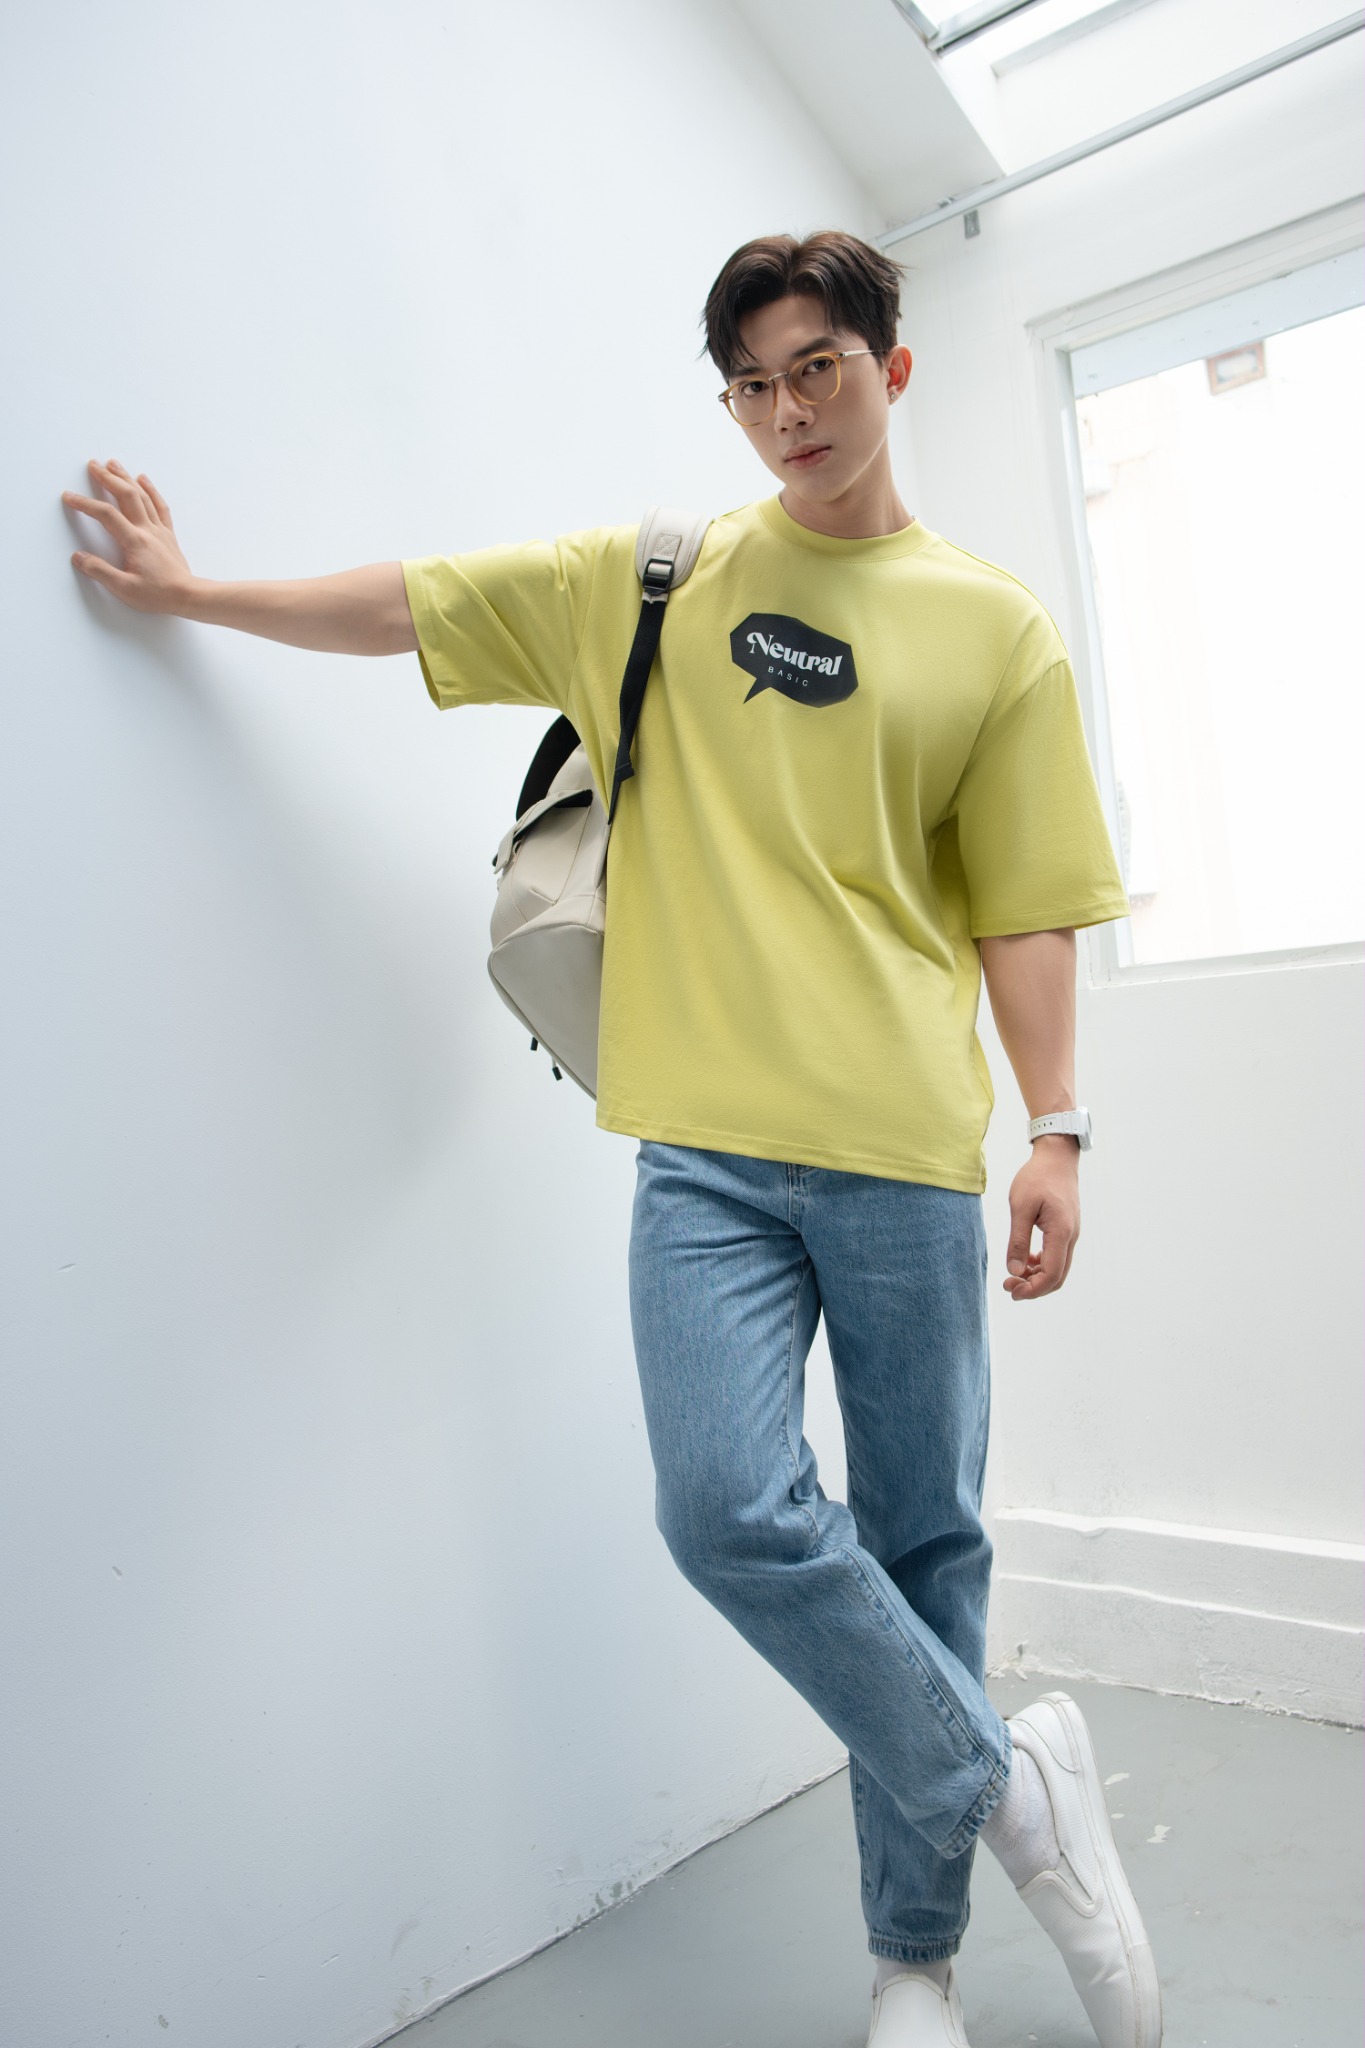 T688 FACTORY OVERSIZE PRINTED "NEUTRAL" T-SHIRT - YELLOW